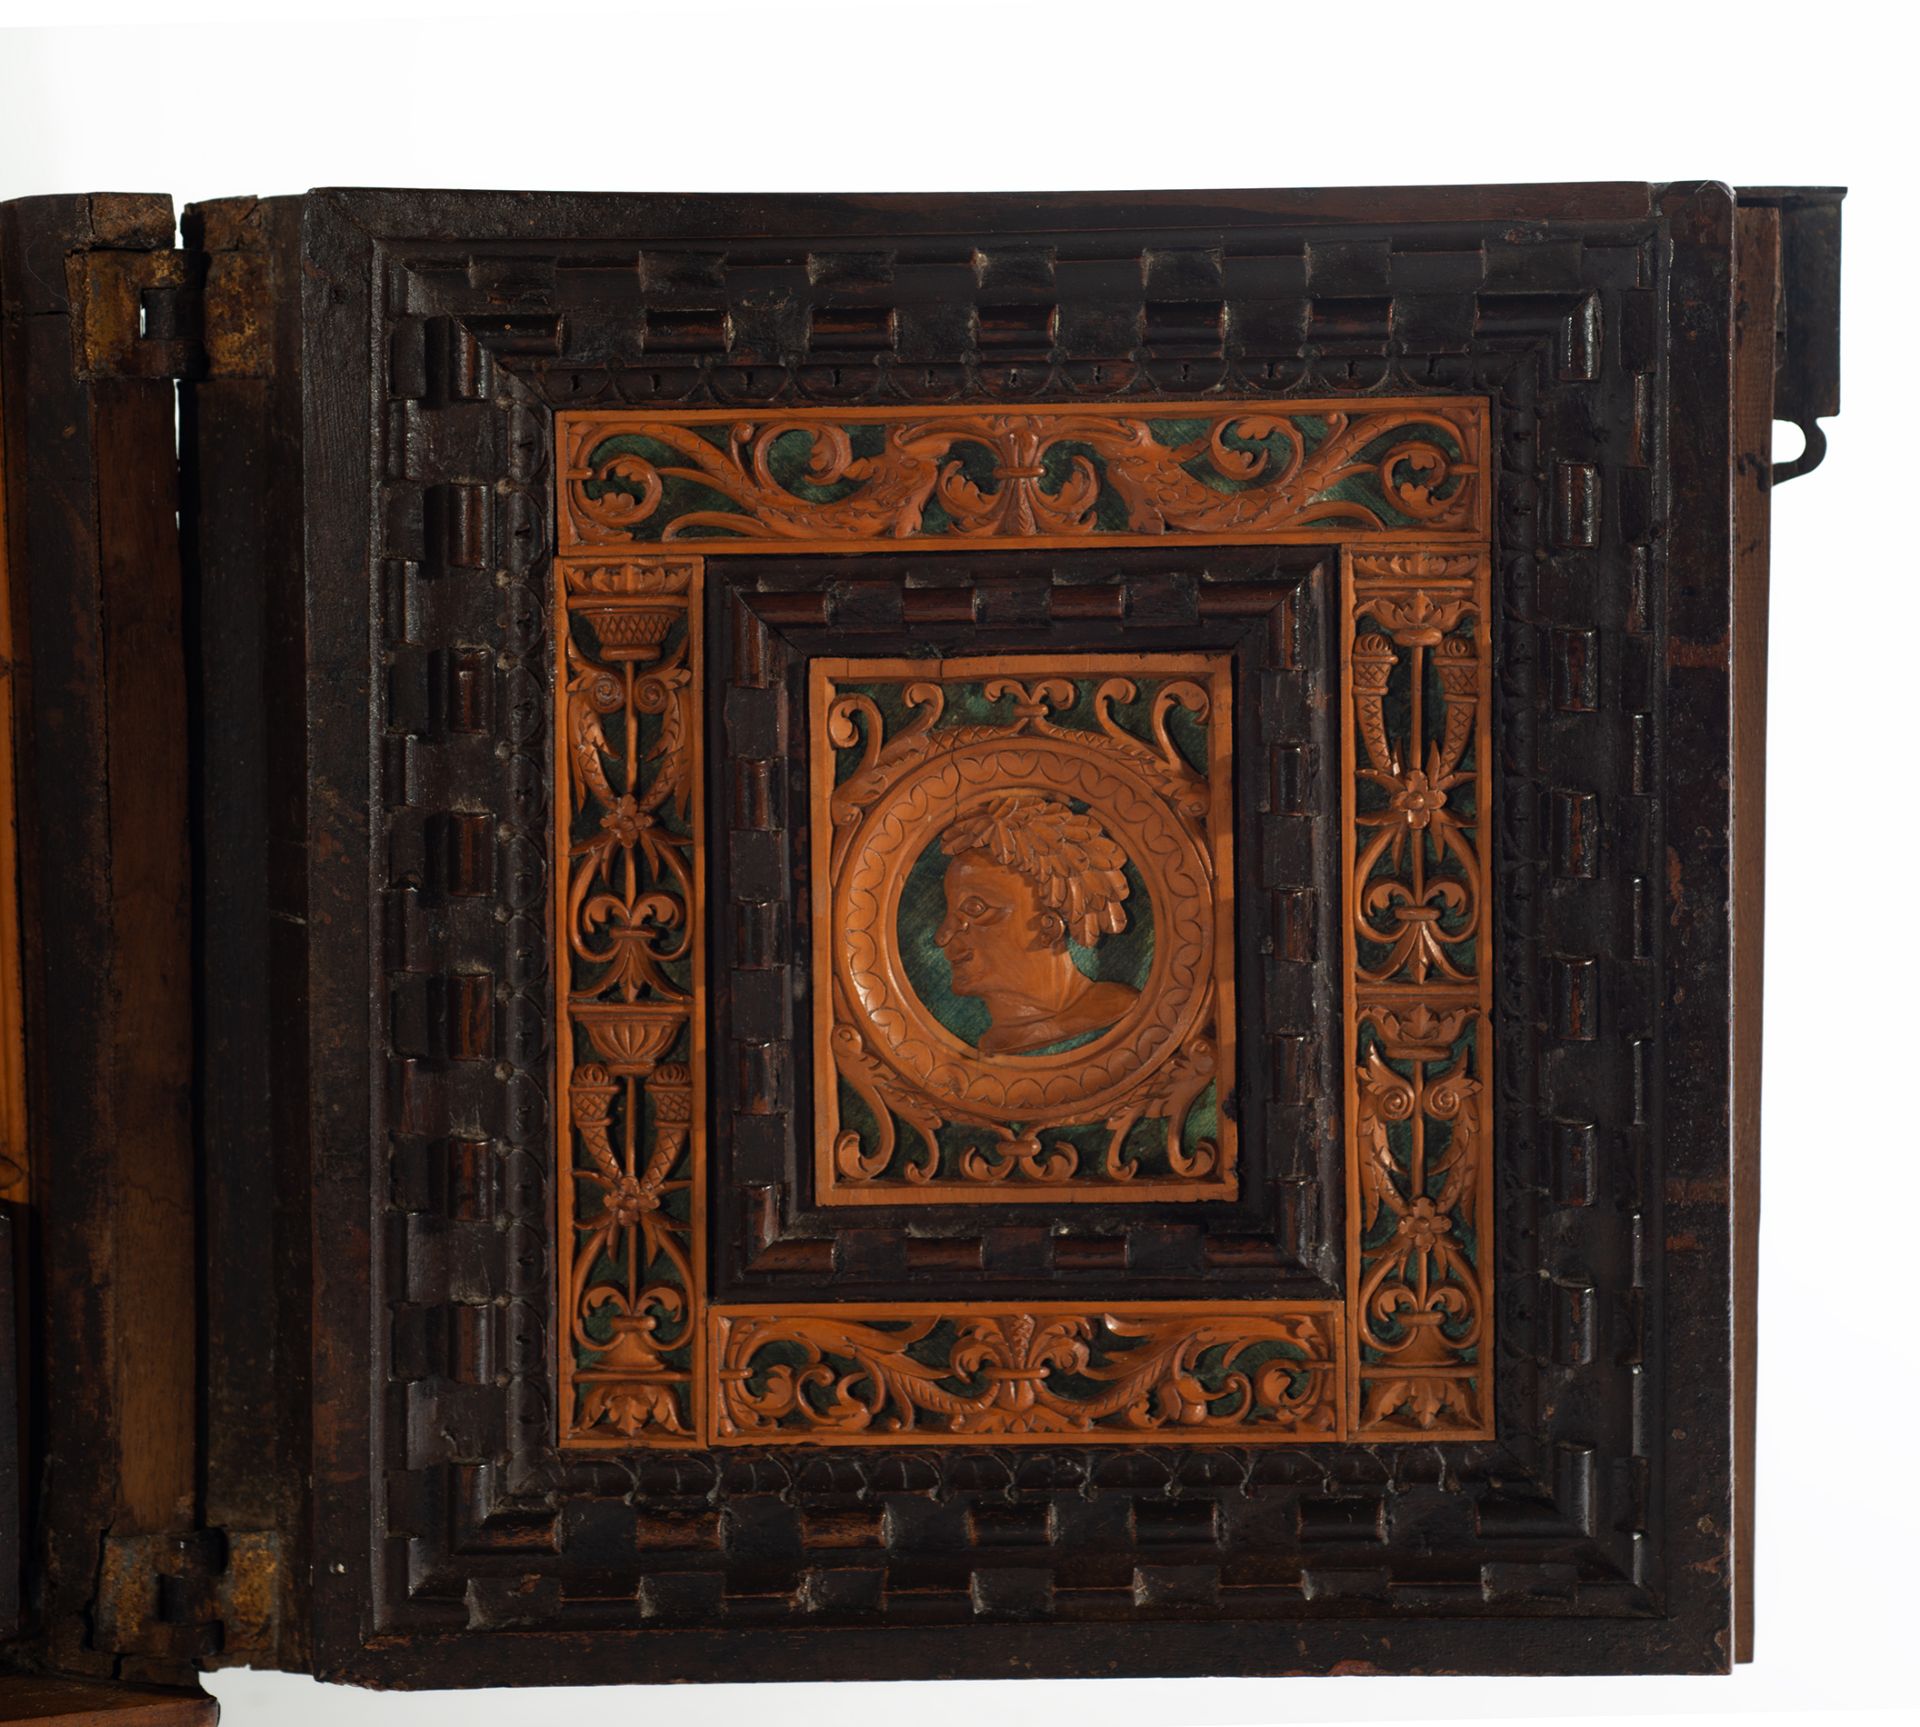 Exceptional plateresque chest in fruit wood, boxwood and marquetry, Spanish Renaissance, mid-16th ce - Image 10 of 13